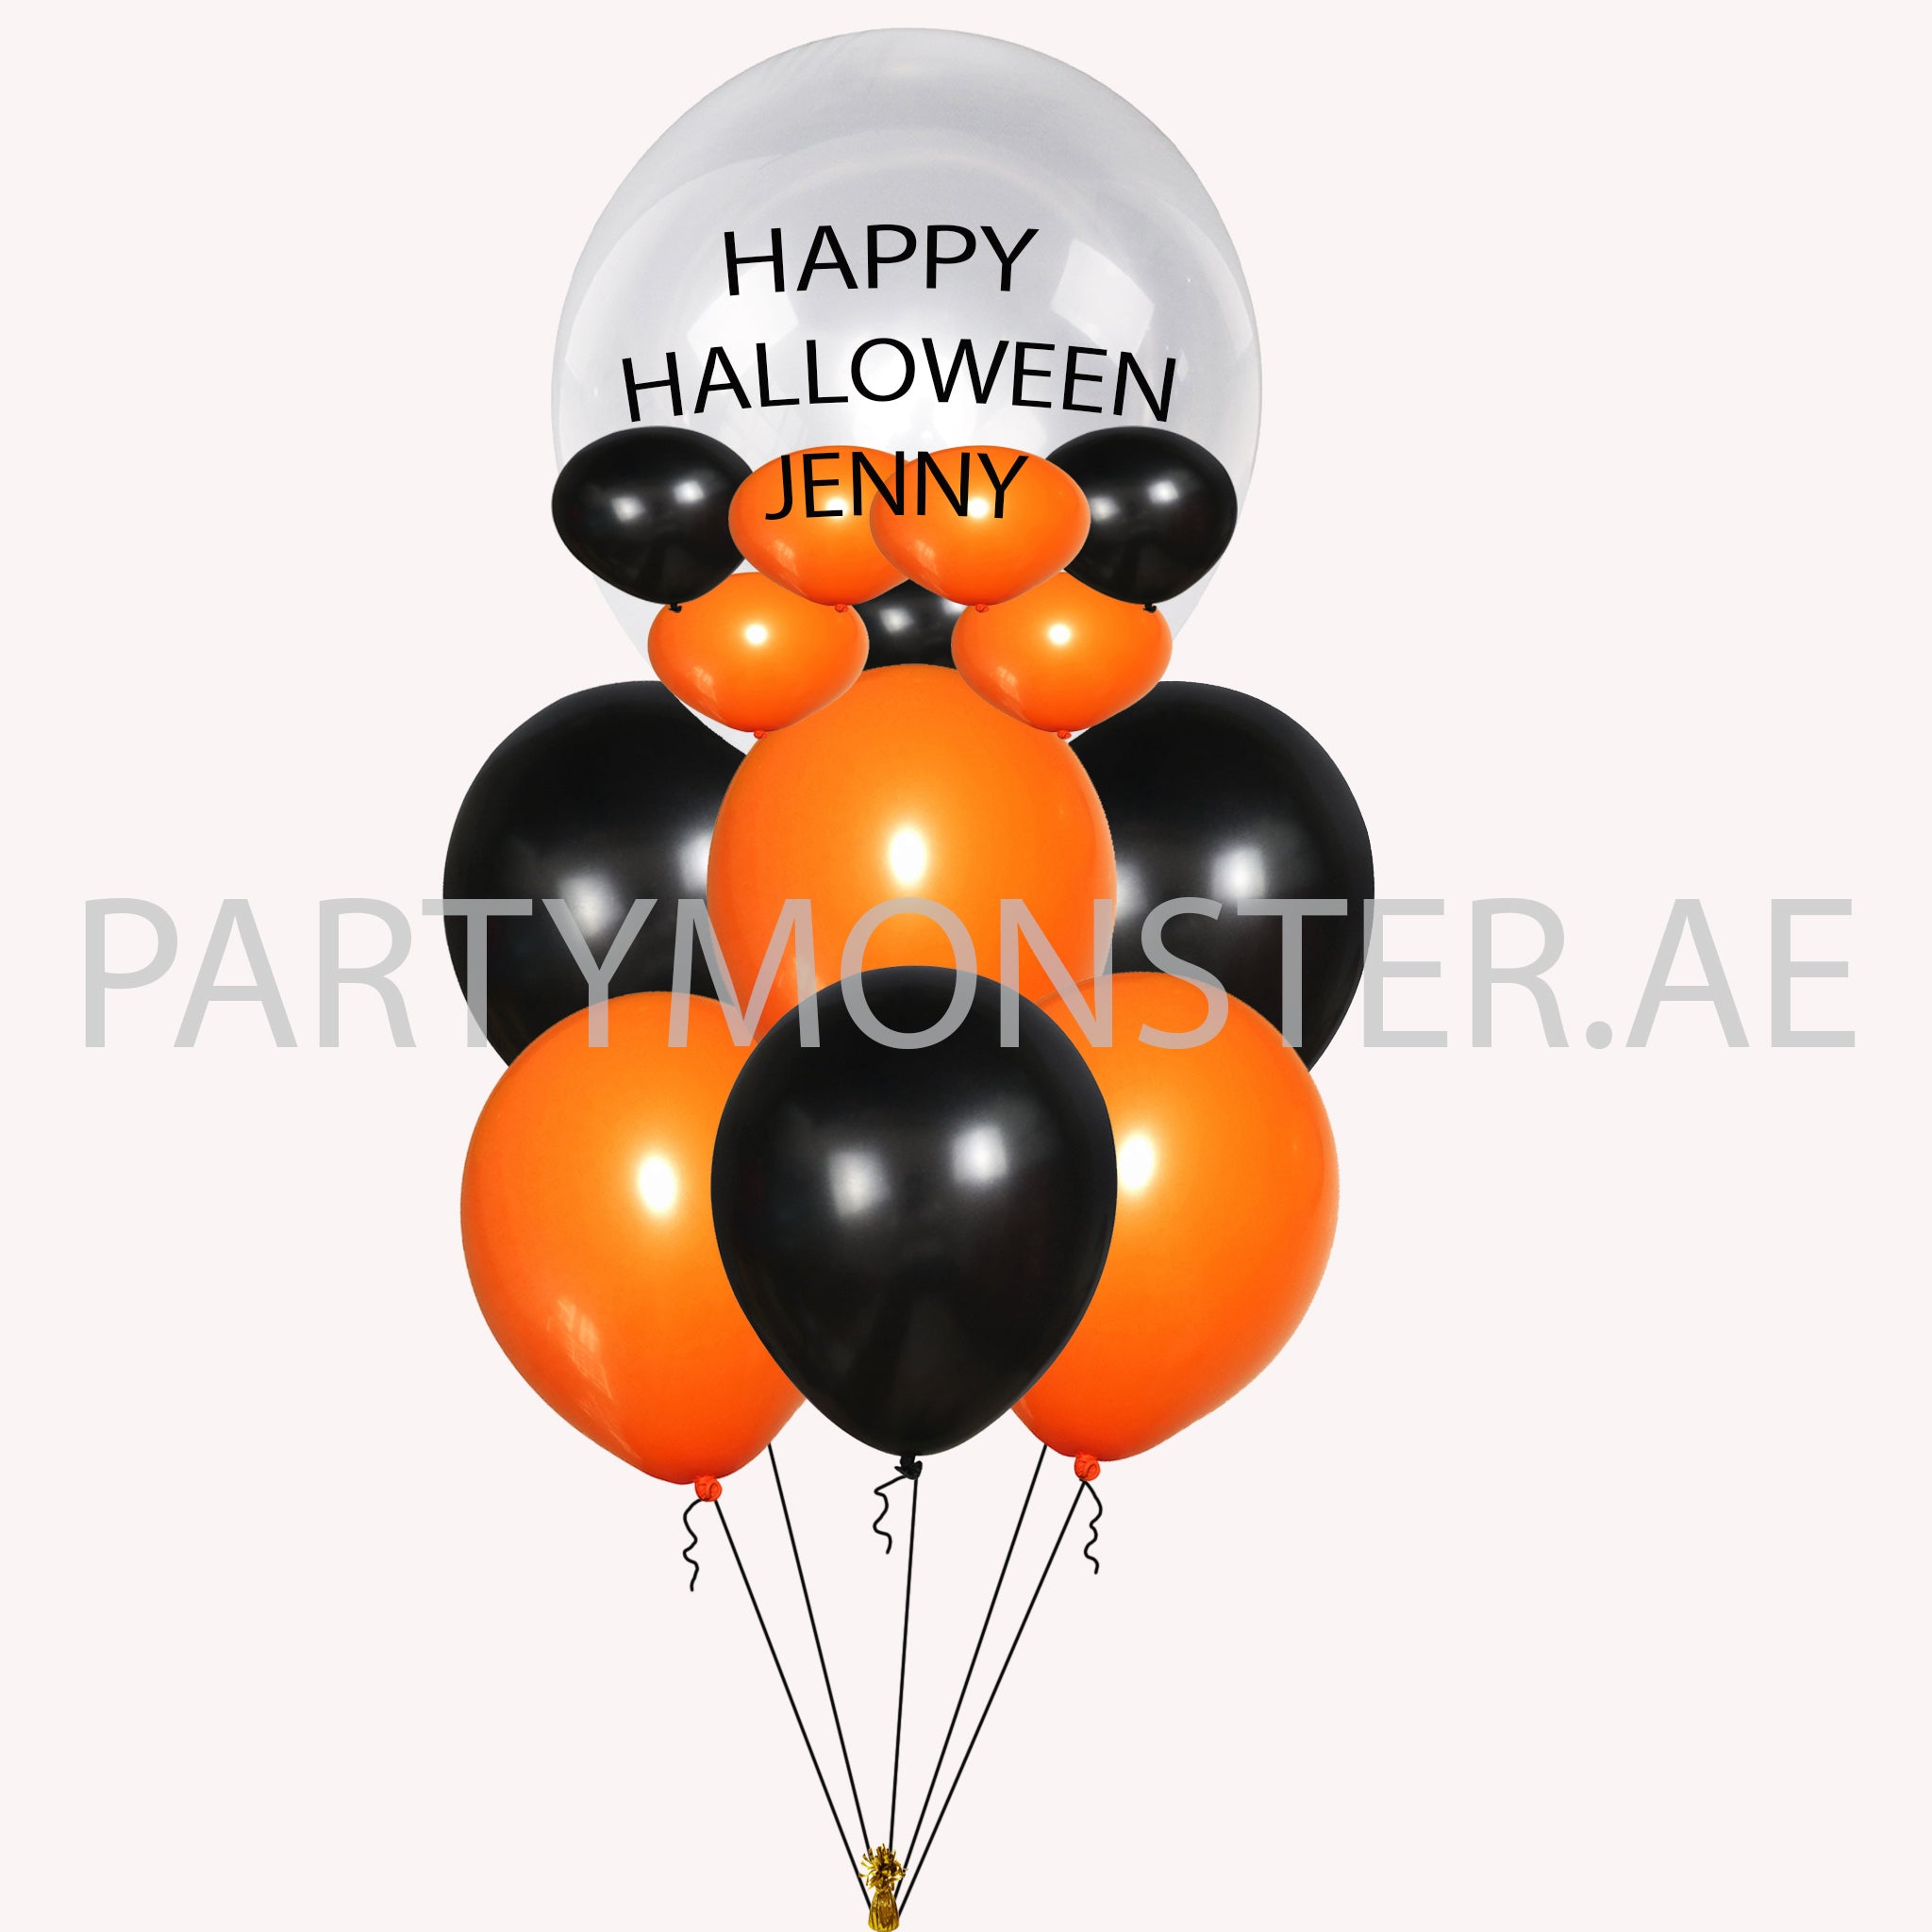 Happy Halloween Customized Balloons for sale online in Dubai